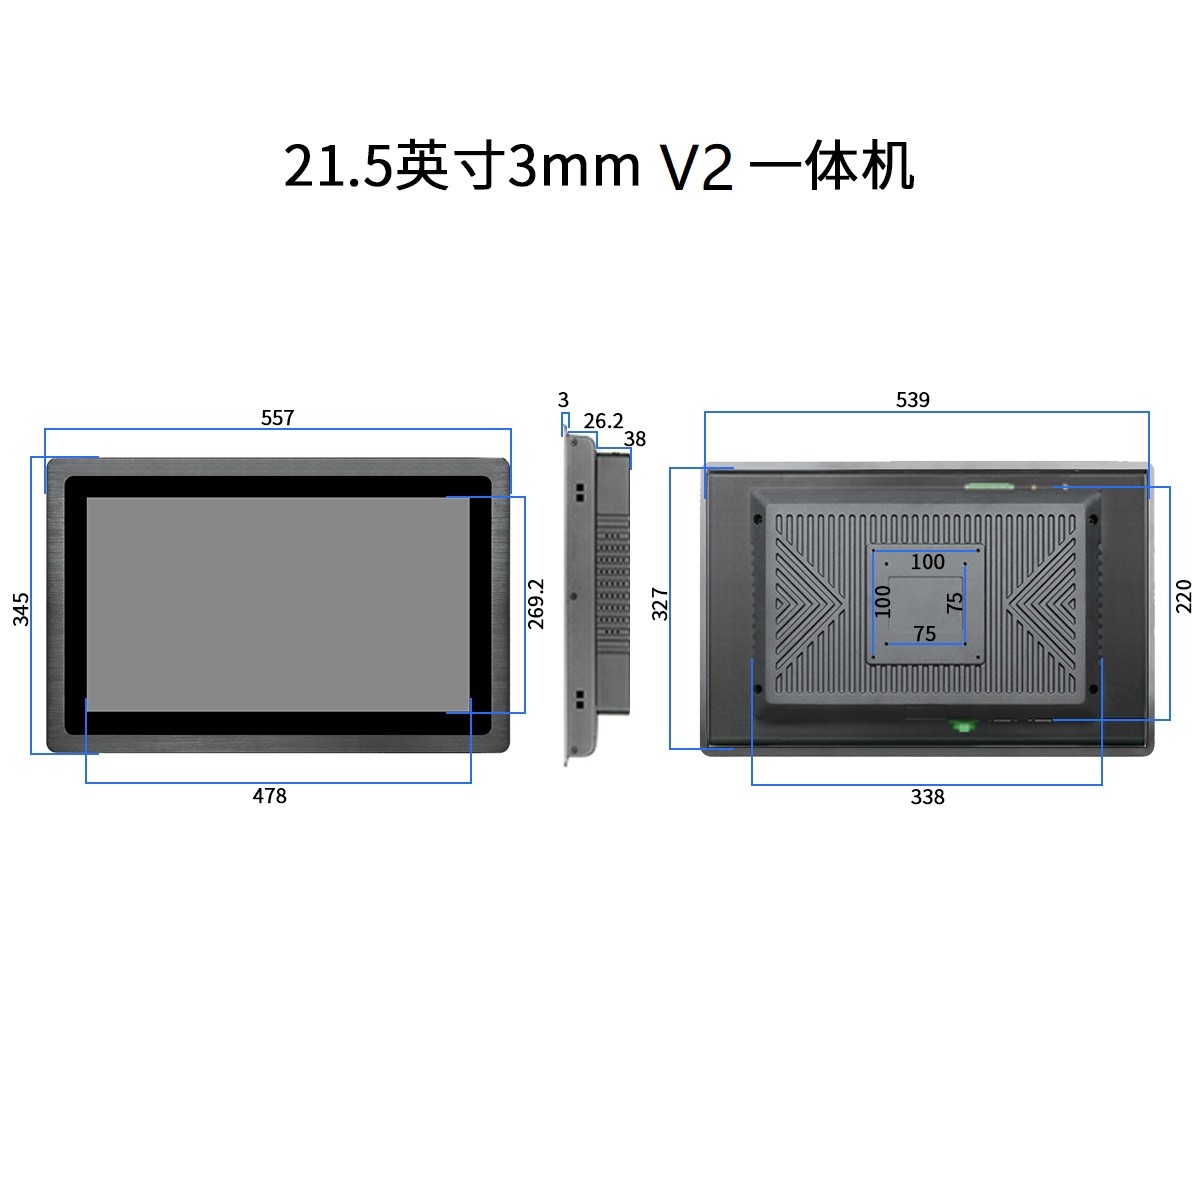 Buy cheap Panel Mount DC12V HMI 21.5inch Widescreen TFT LCD Touch Display Rugged Panel PC from wholesalers